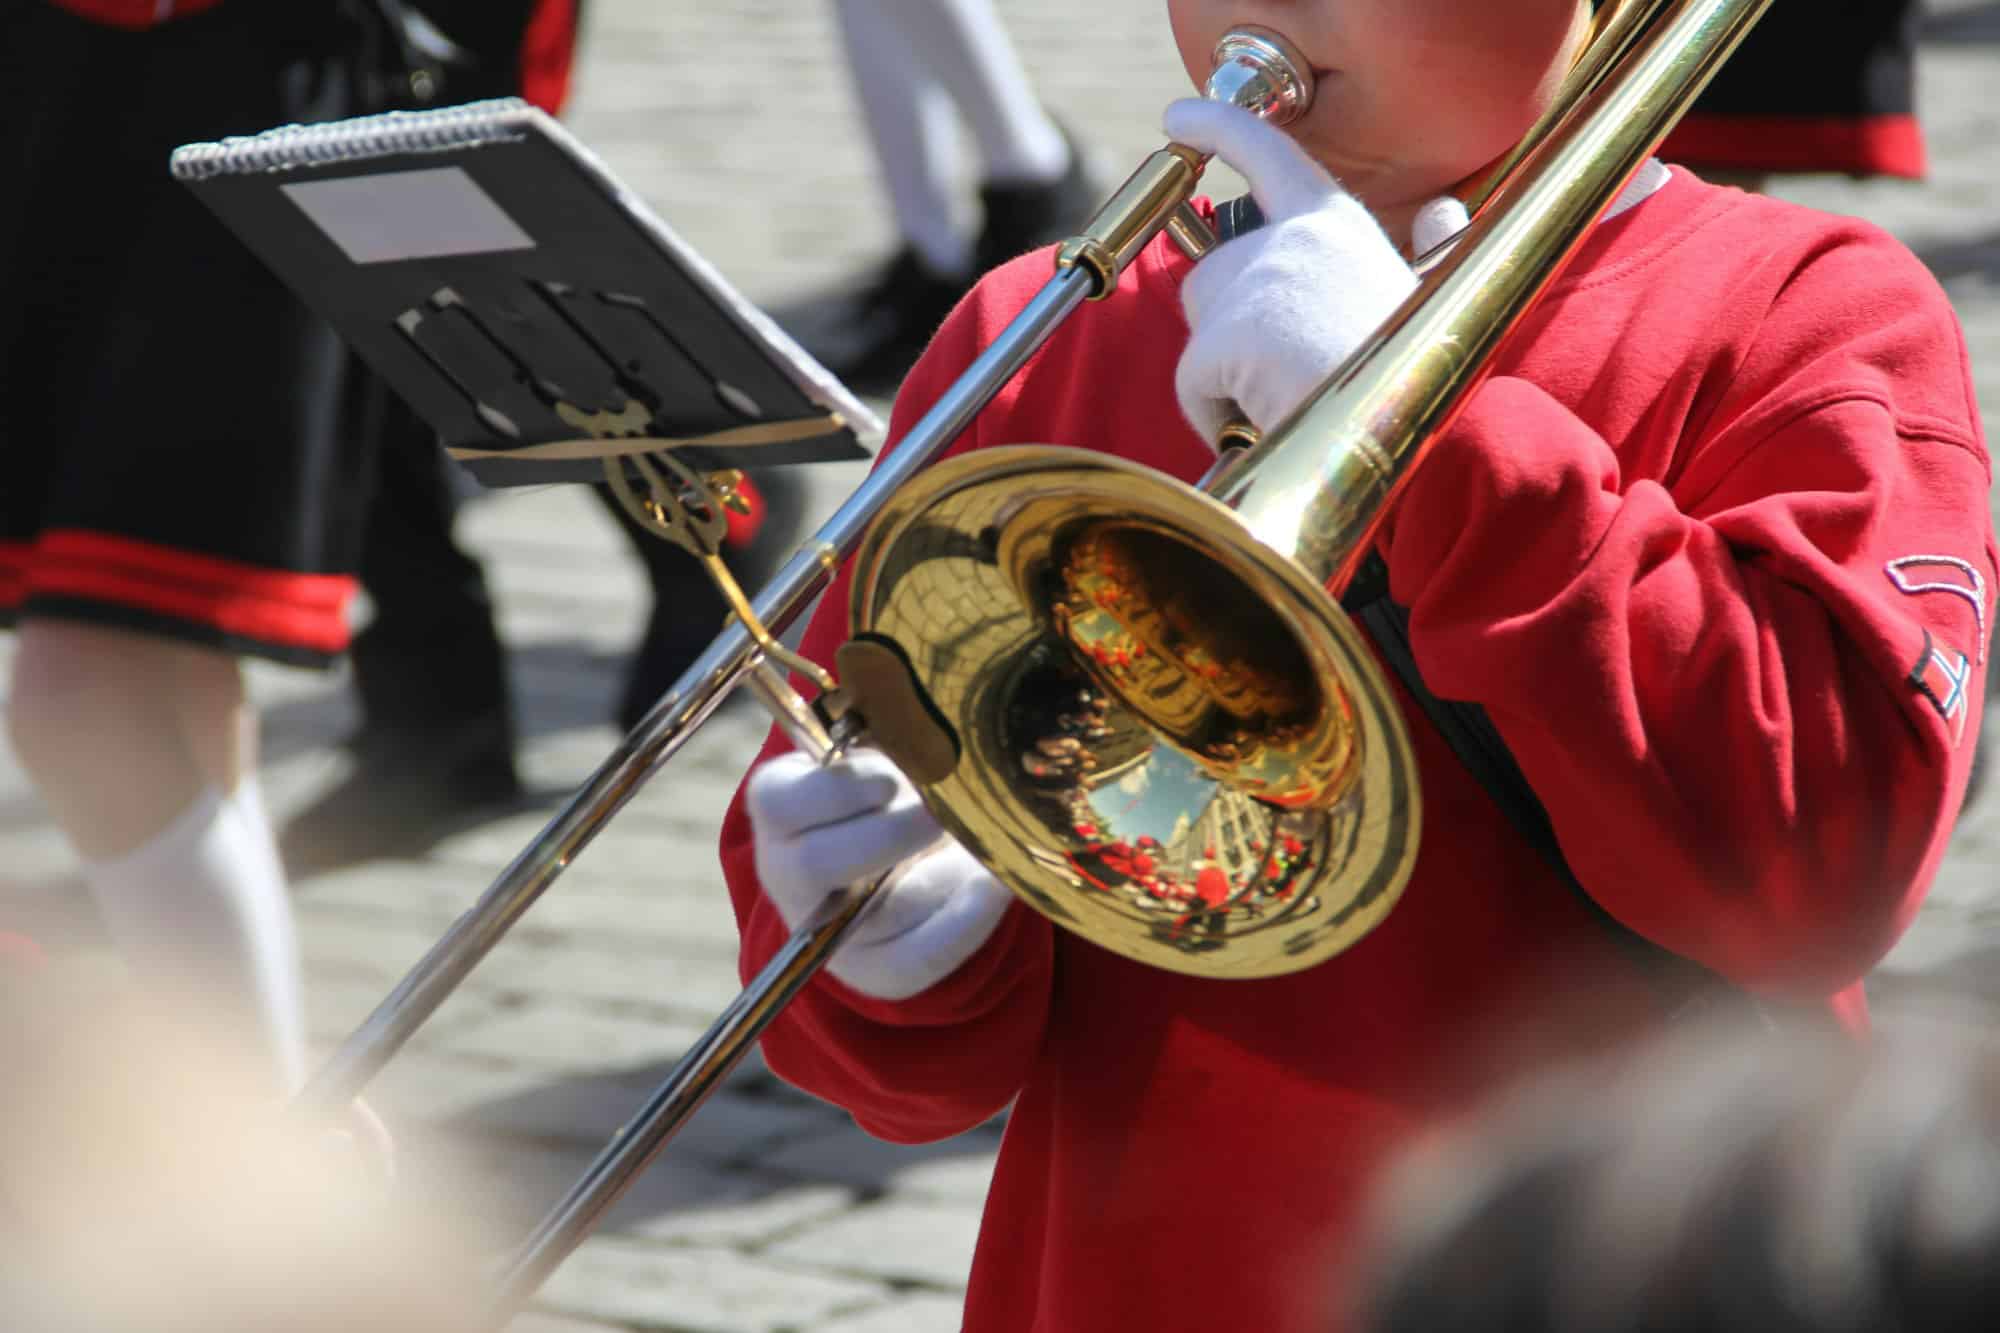 Gen Z male playing a trombone during 17 May Norwegian Constitution day parade celebration.